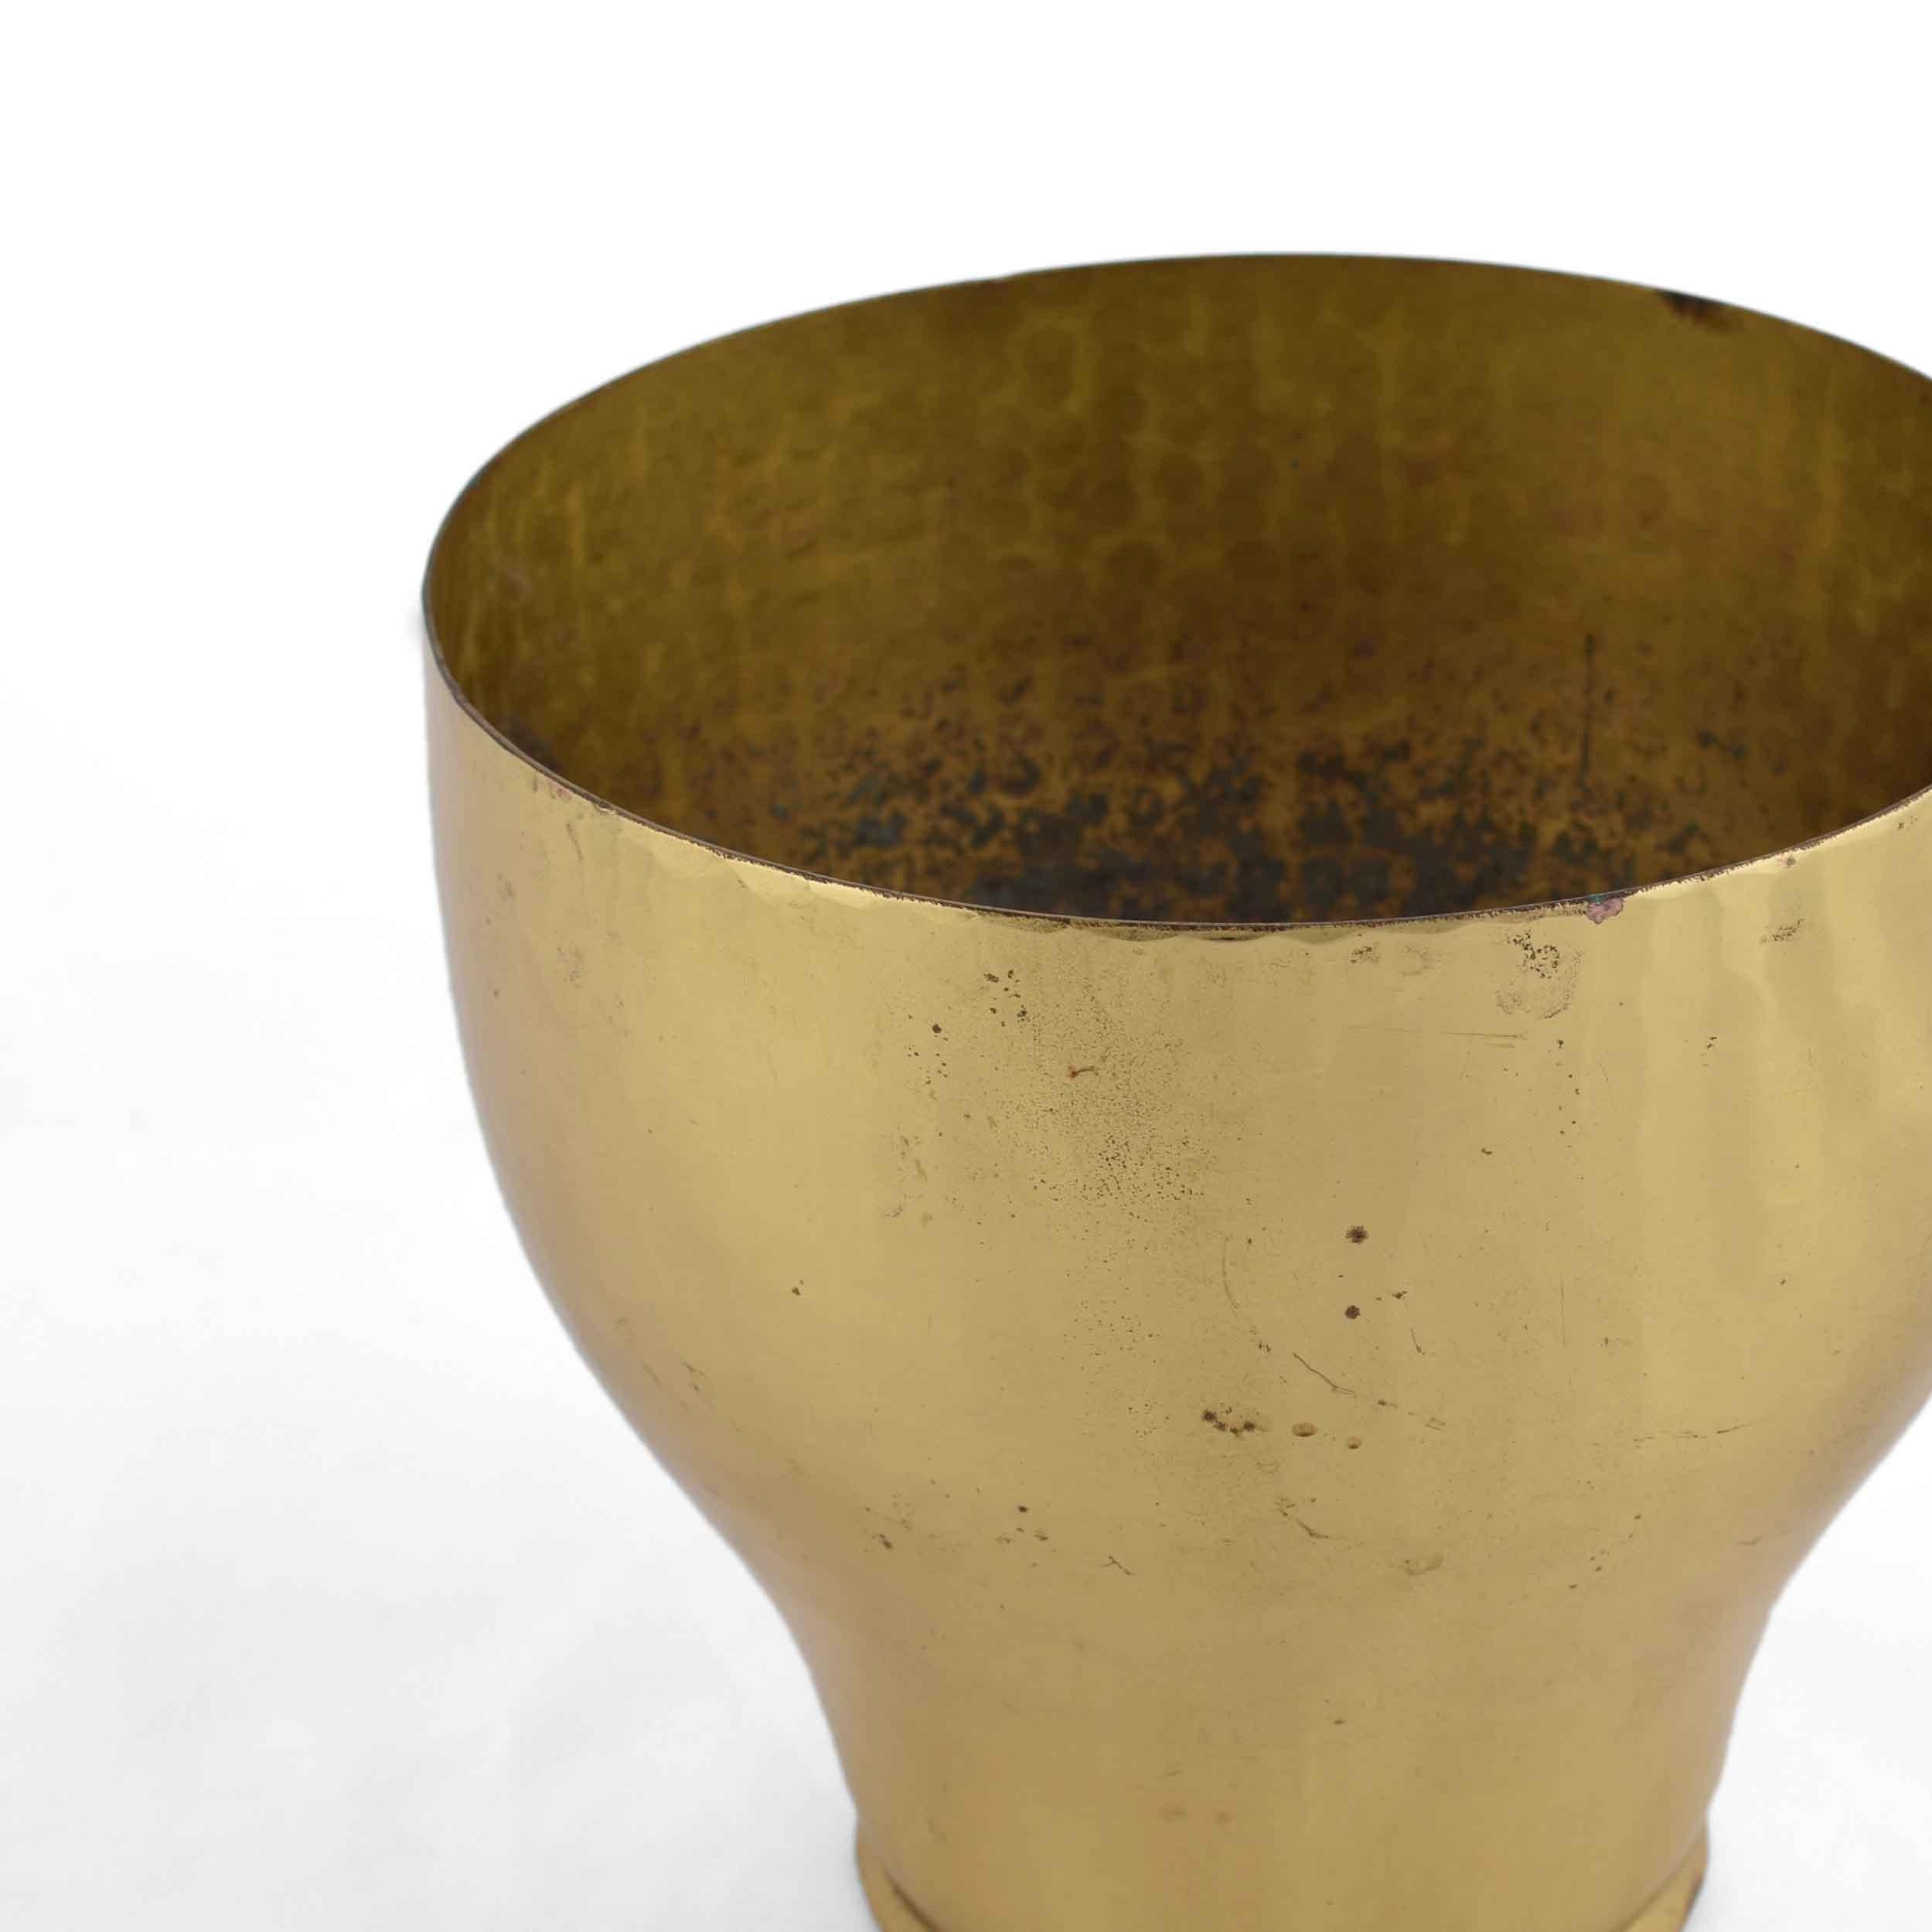 Vintage brass plant pot is an original object realized in the 1950s.

Realized by Eugen Zint. Made in Germany.

The label of Eugen Zint is present on the base. 

Original brass beiden.

Good conditions, wear compatible with age and use.